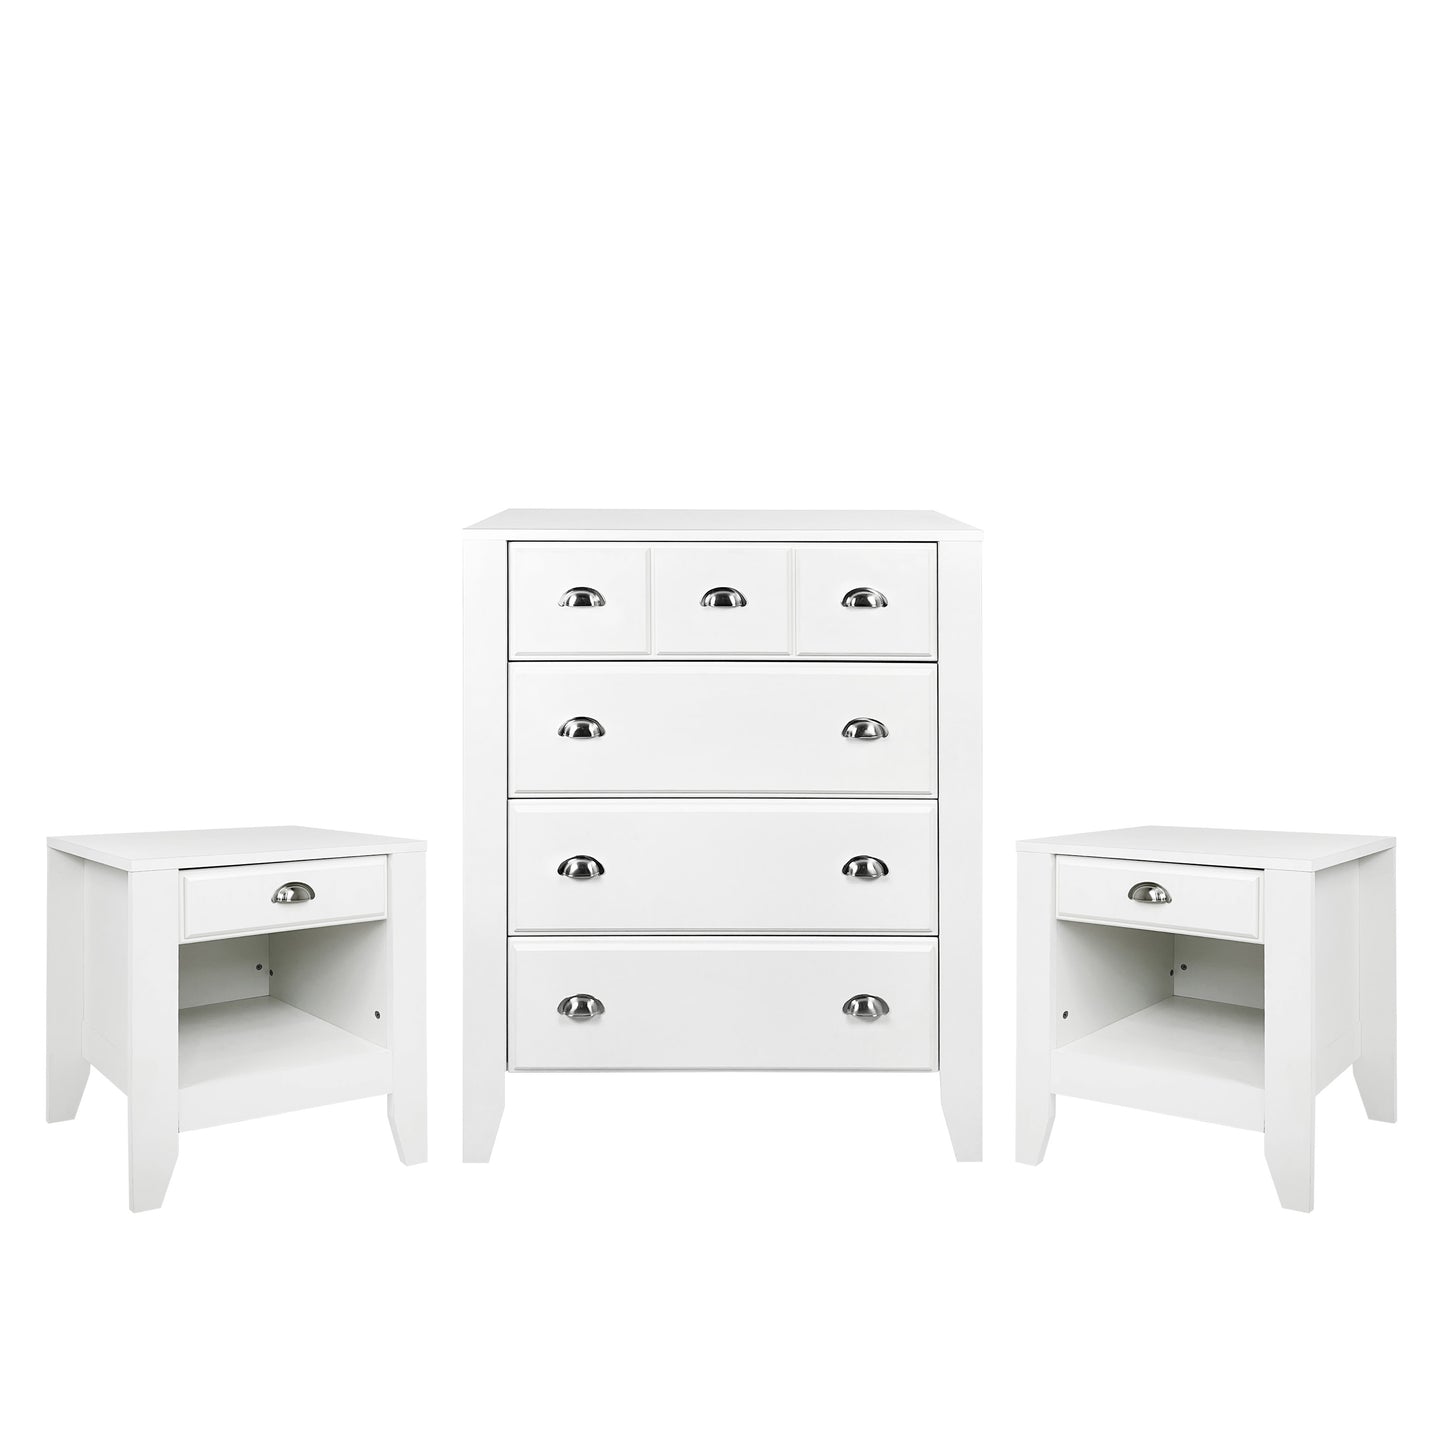 Cleary Contemporary Faux Wood 3 Piece Dresser and Nightstand Bedroom Set